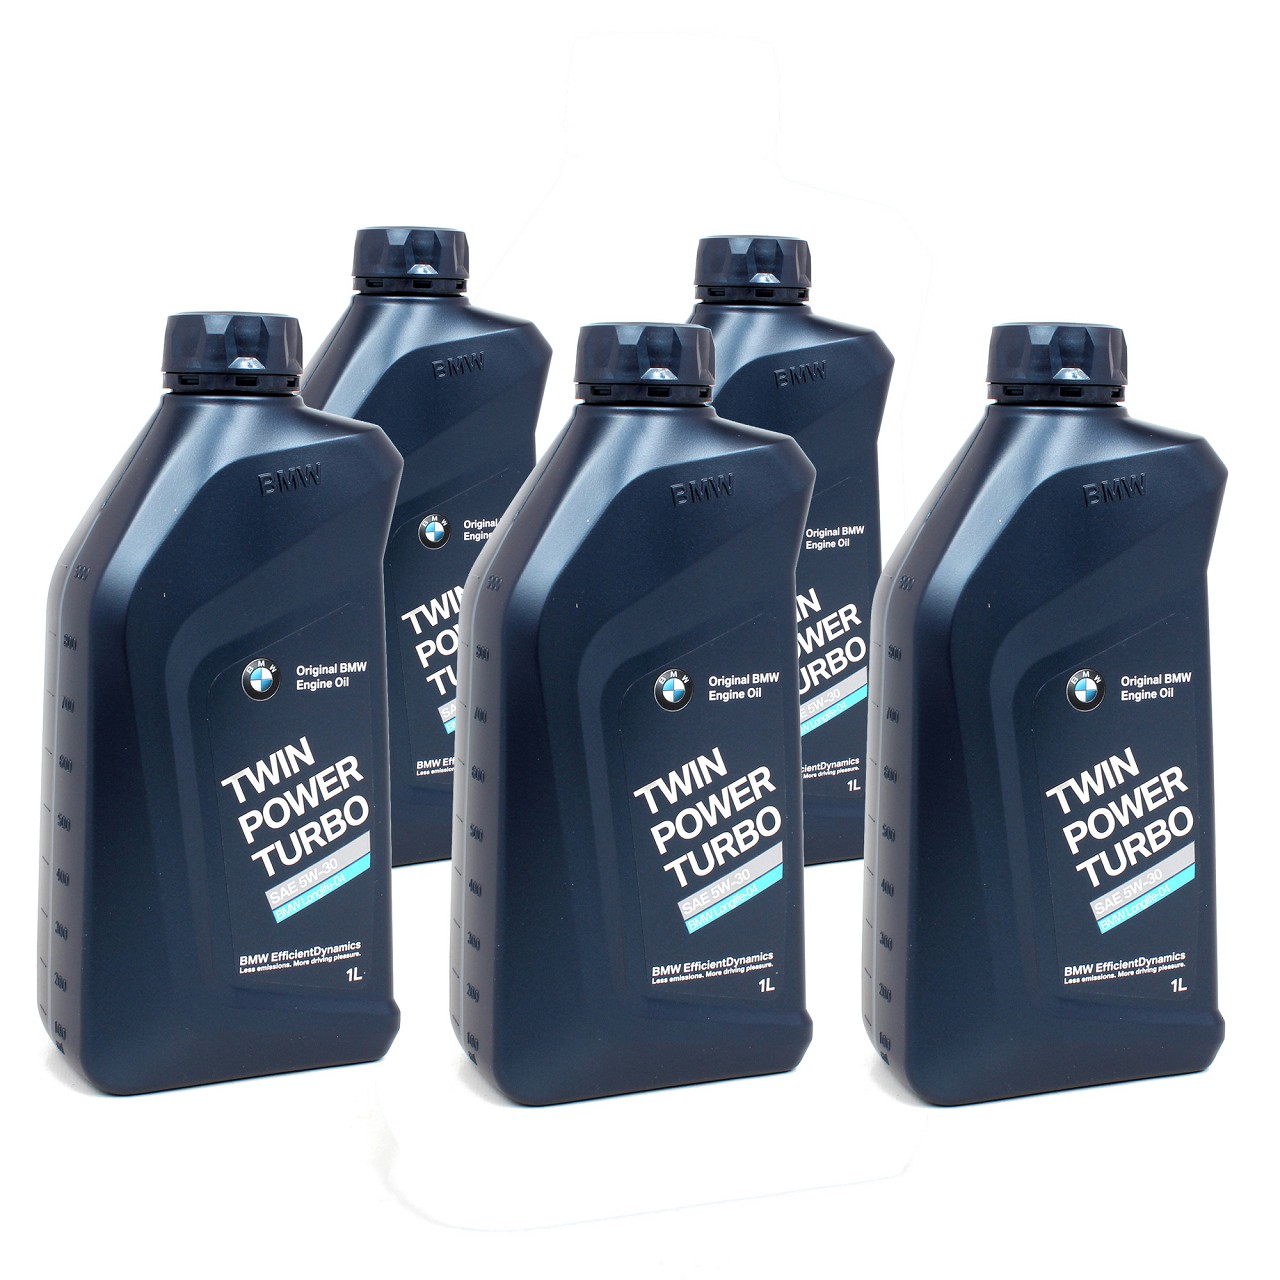 BMW engine oil product package